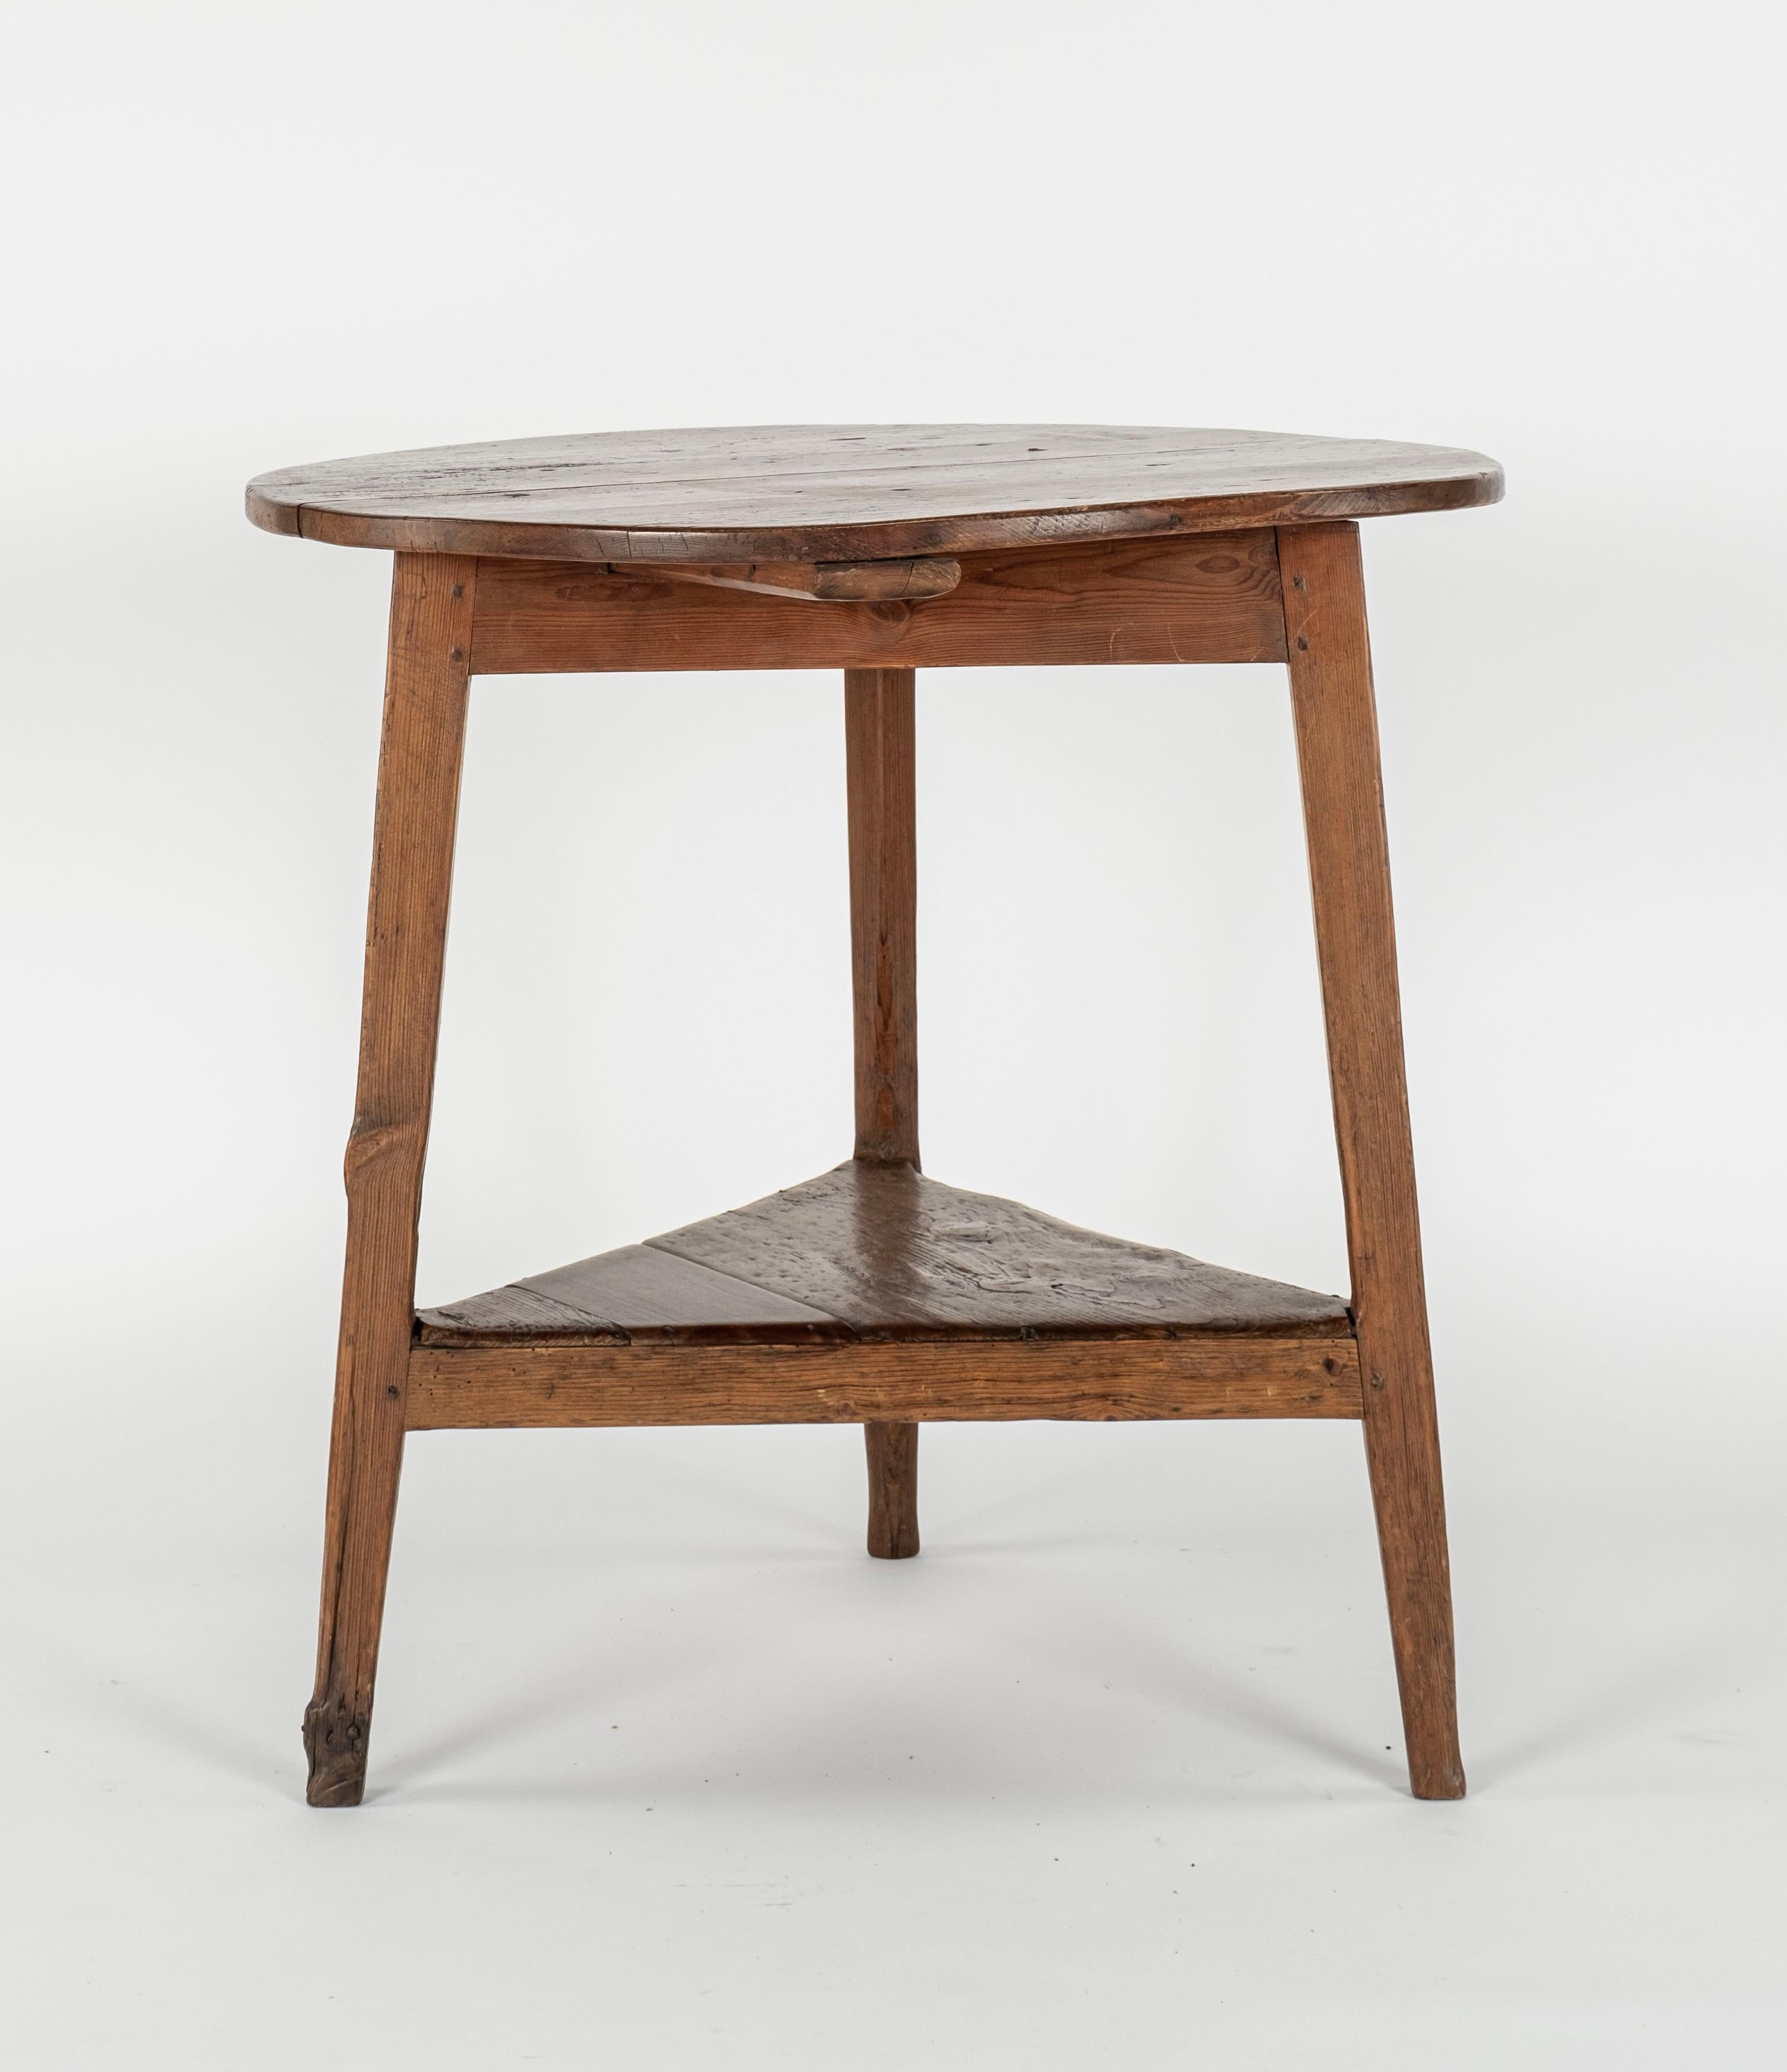 British 19th Century Cricket Table with shelf underneath For Sale